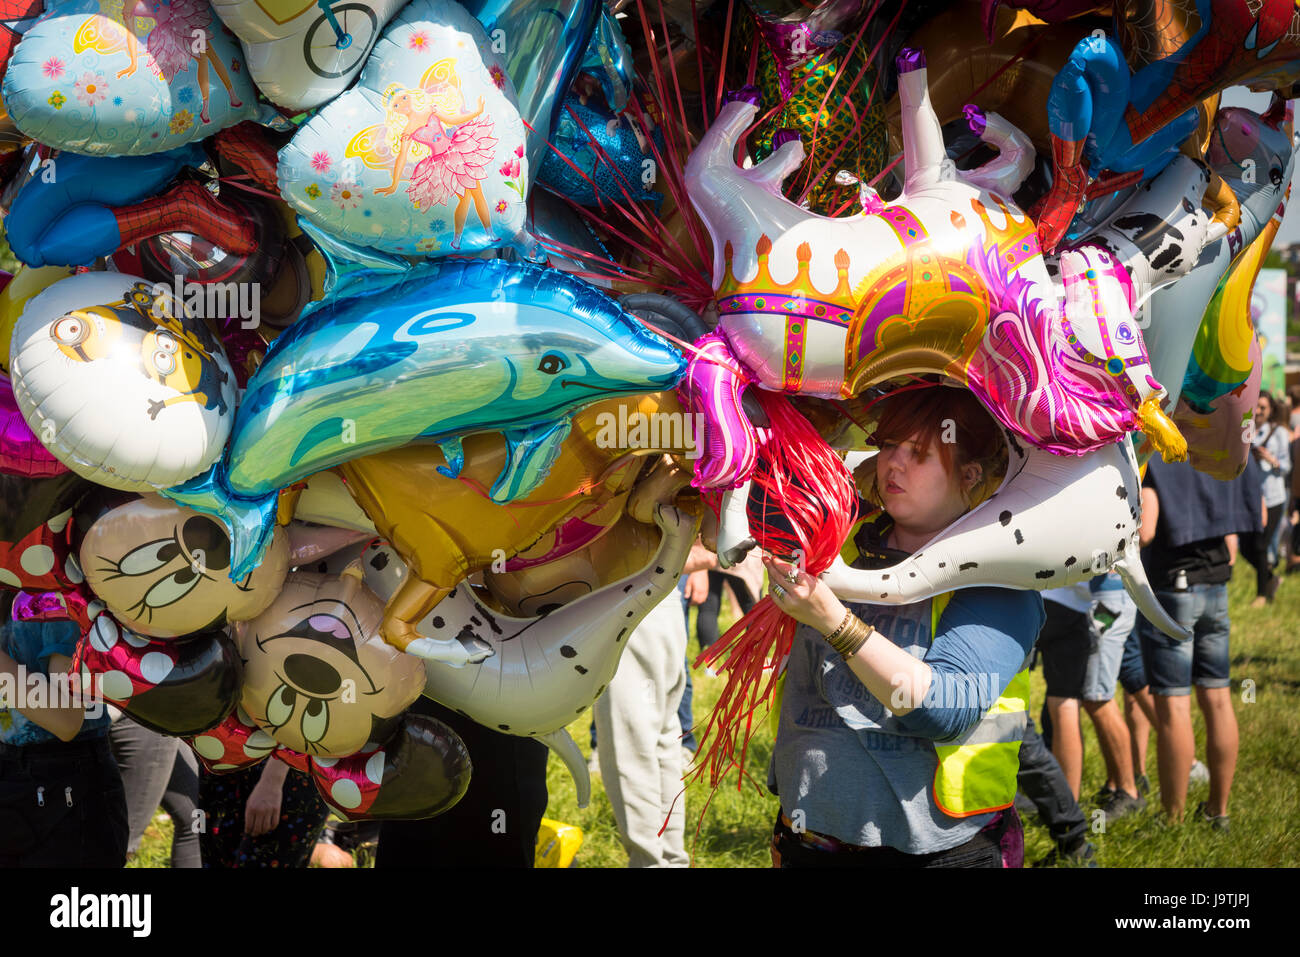 Cambridge, UK. 3rd June, 2017. Revellers enjoy themselves in the sun at the annual Strawberry Fair held on Midsummer Common. Billed as a musical and visual extravanganza for all the family, it is a free music and arts event run by volunteers. Credit: Julian Eales/Alamy Live News Stock Photo